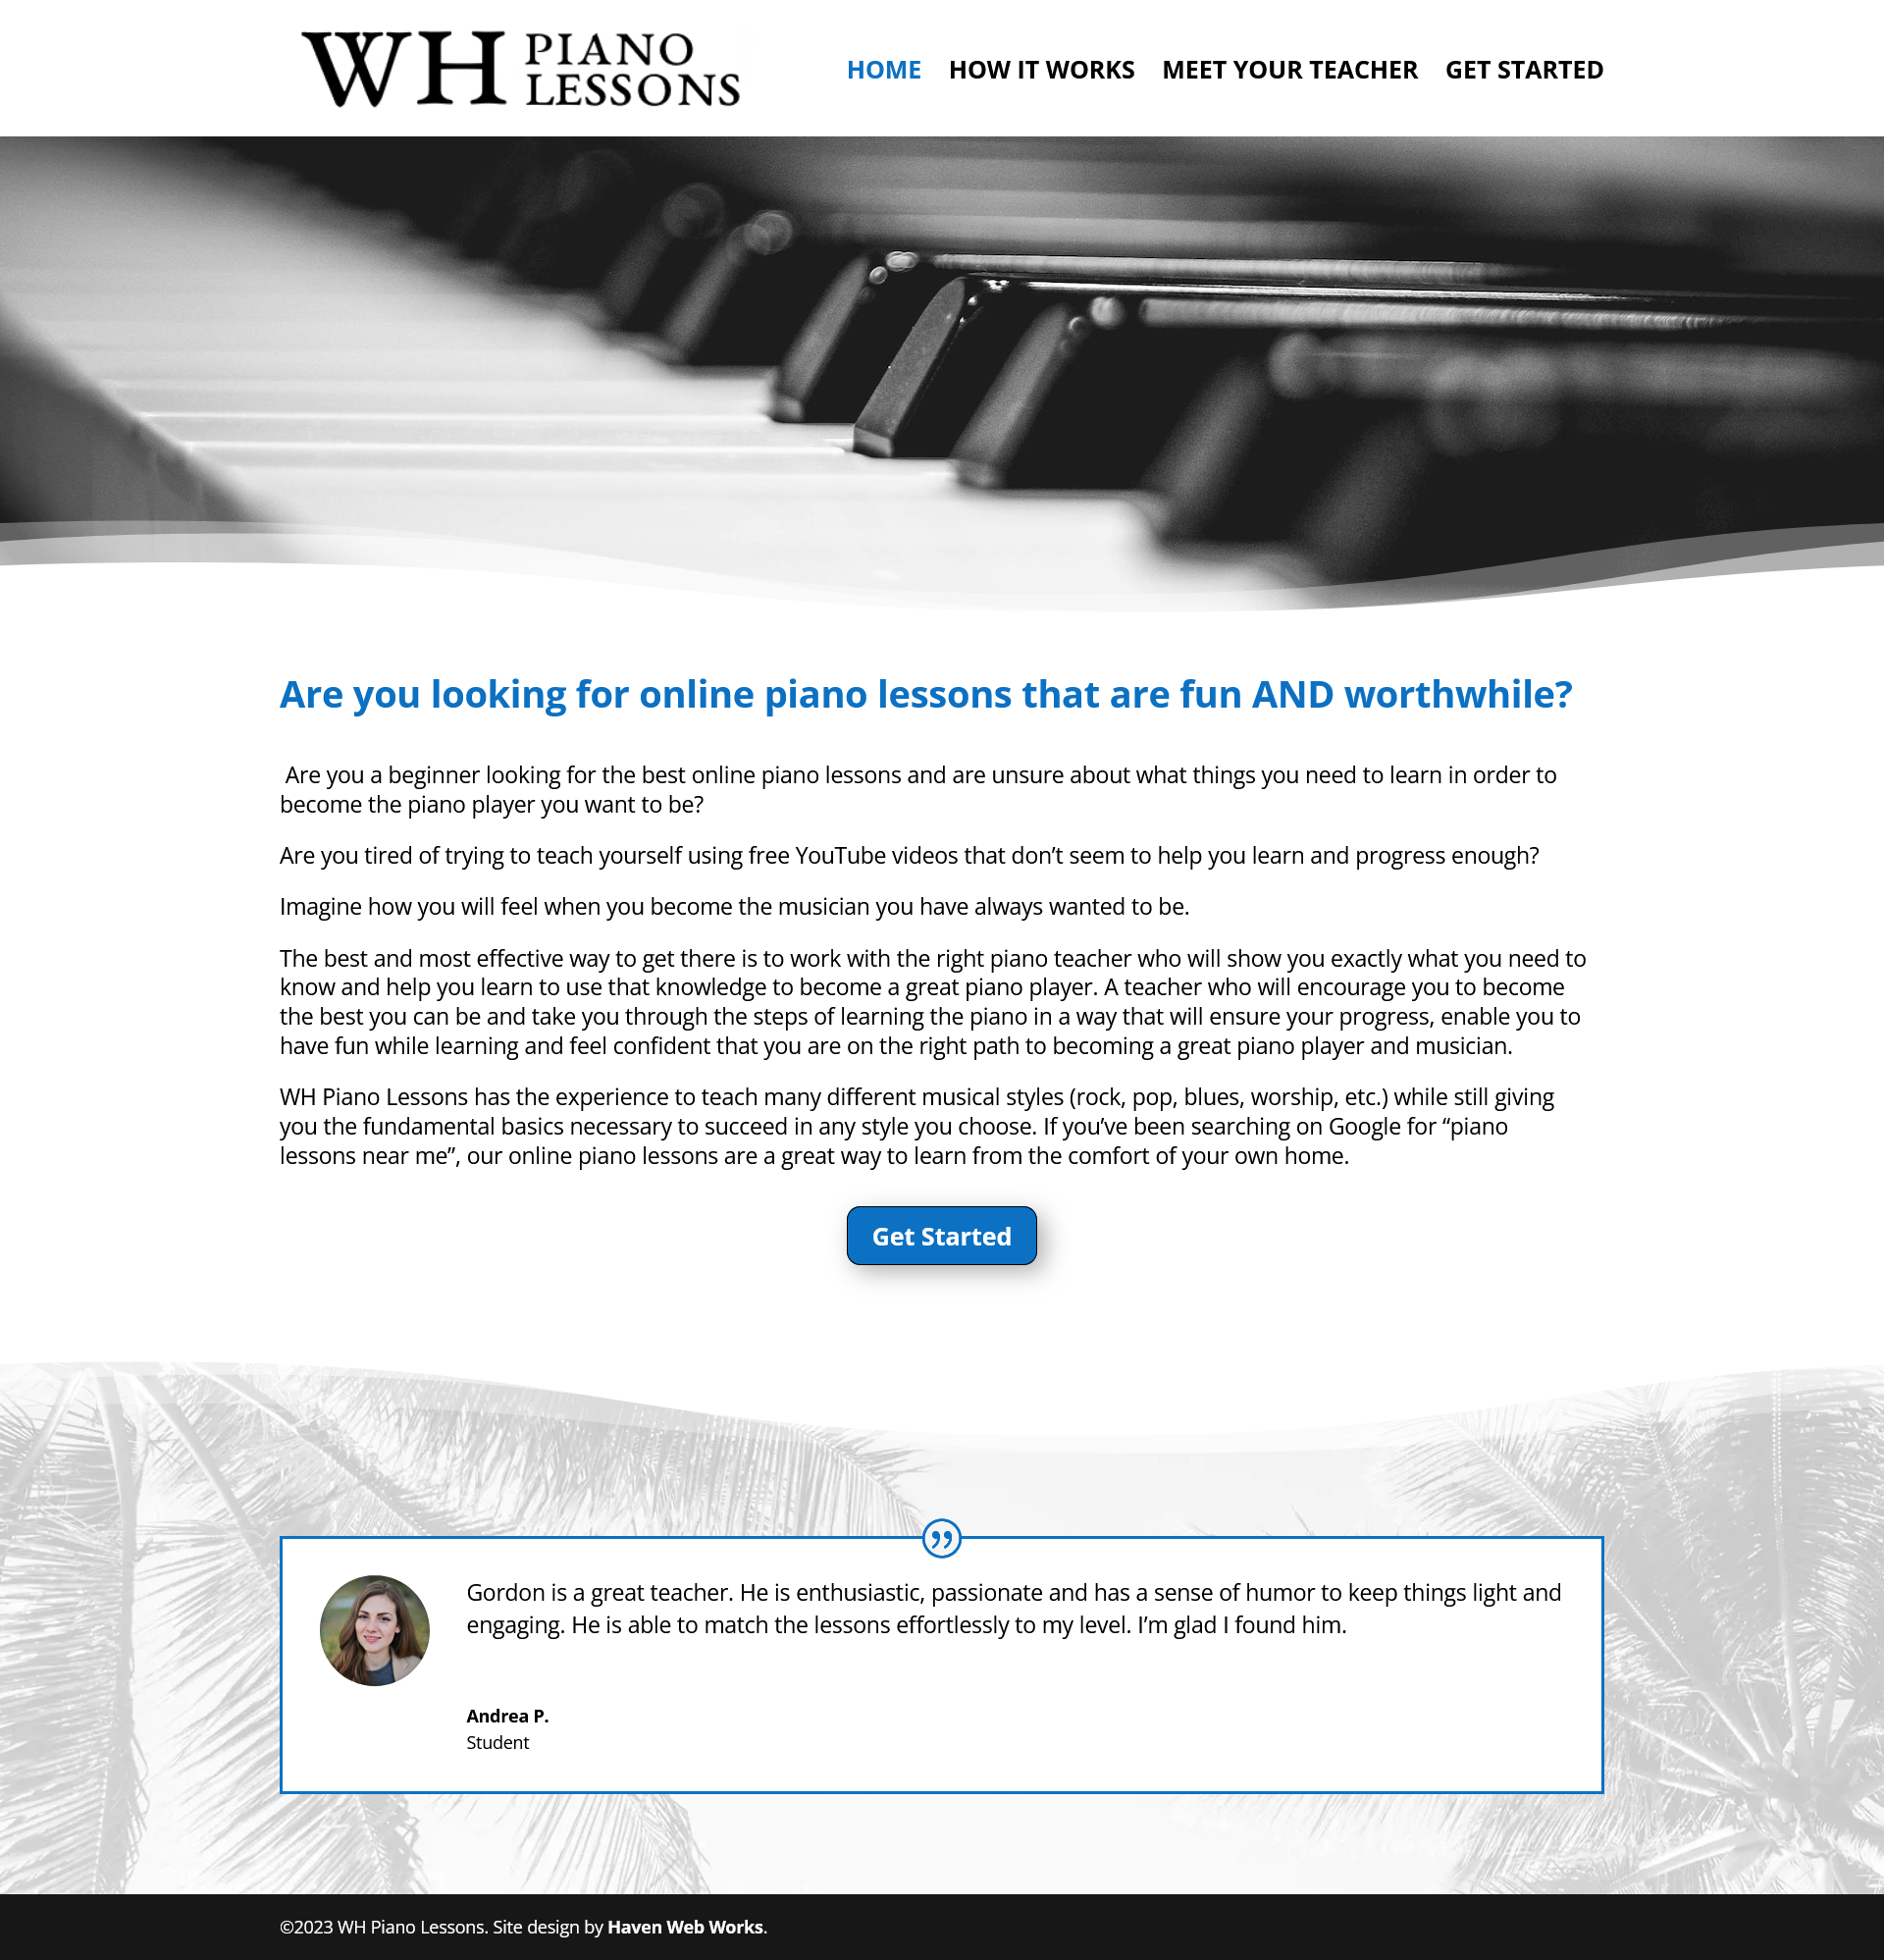 wh piano lessons